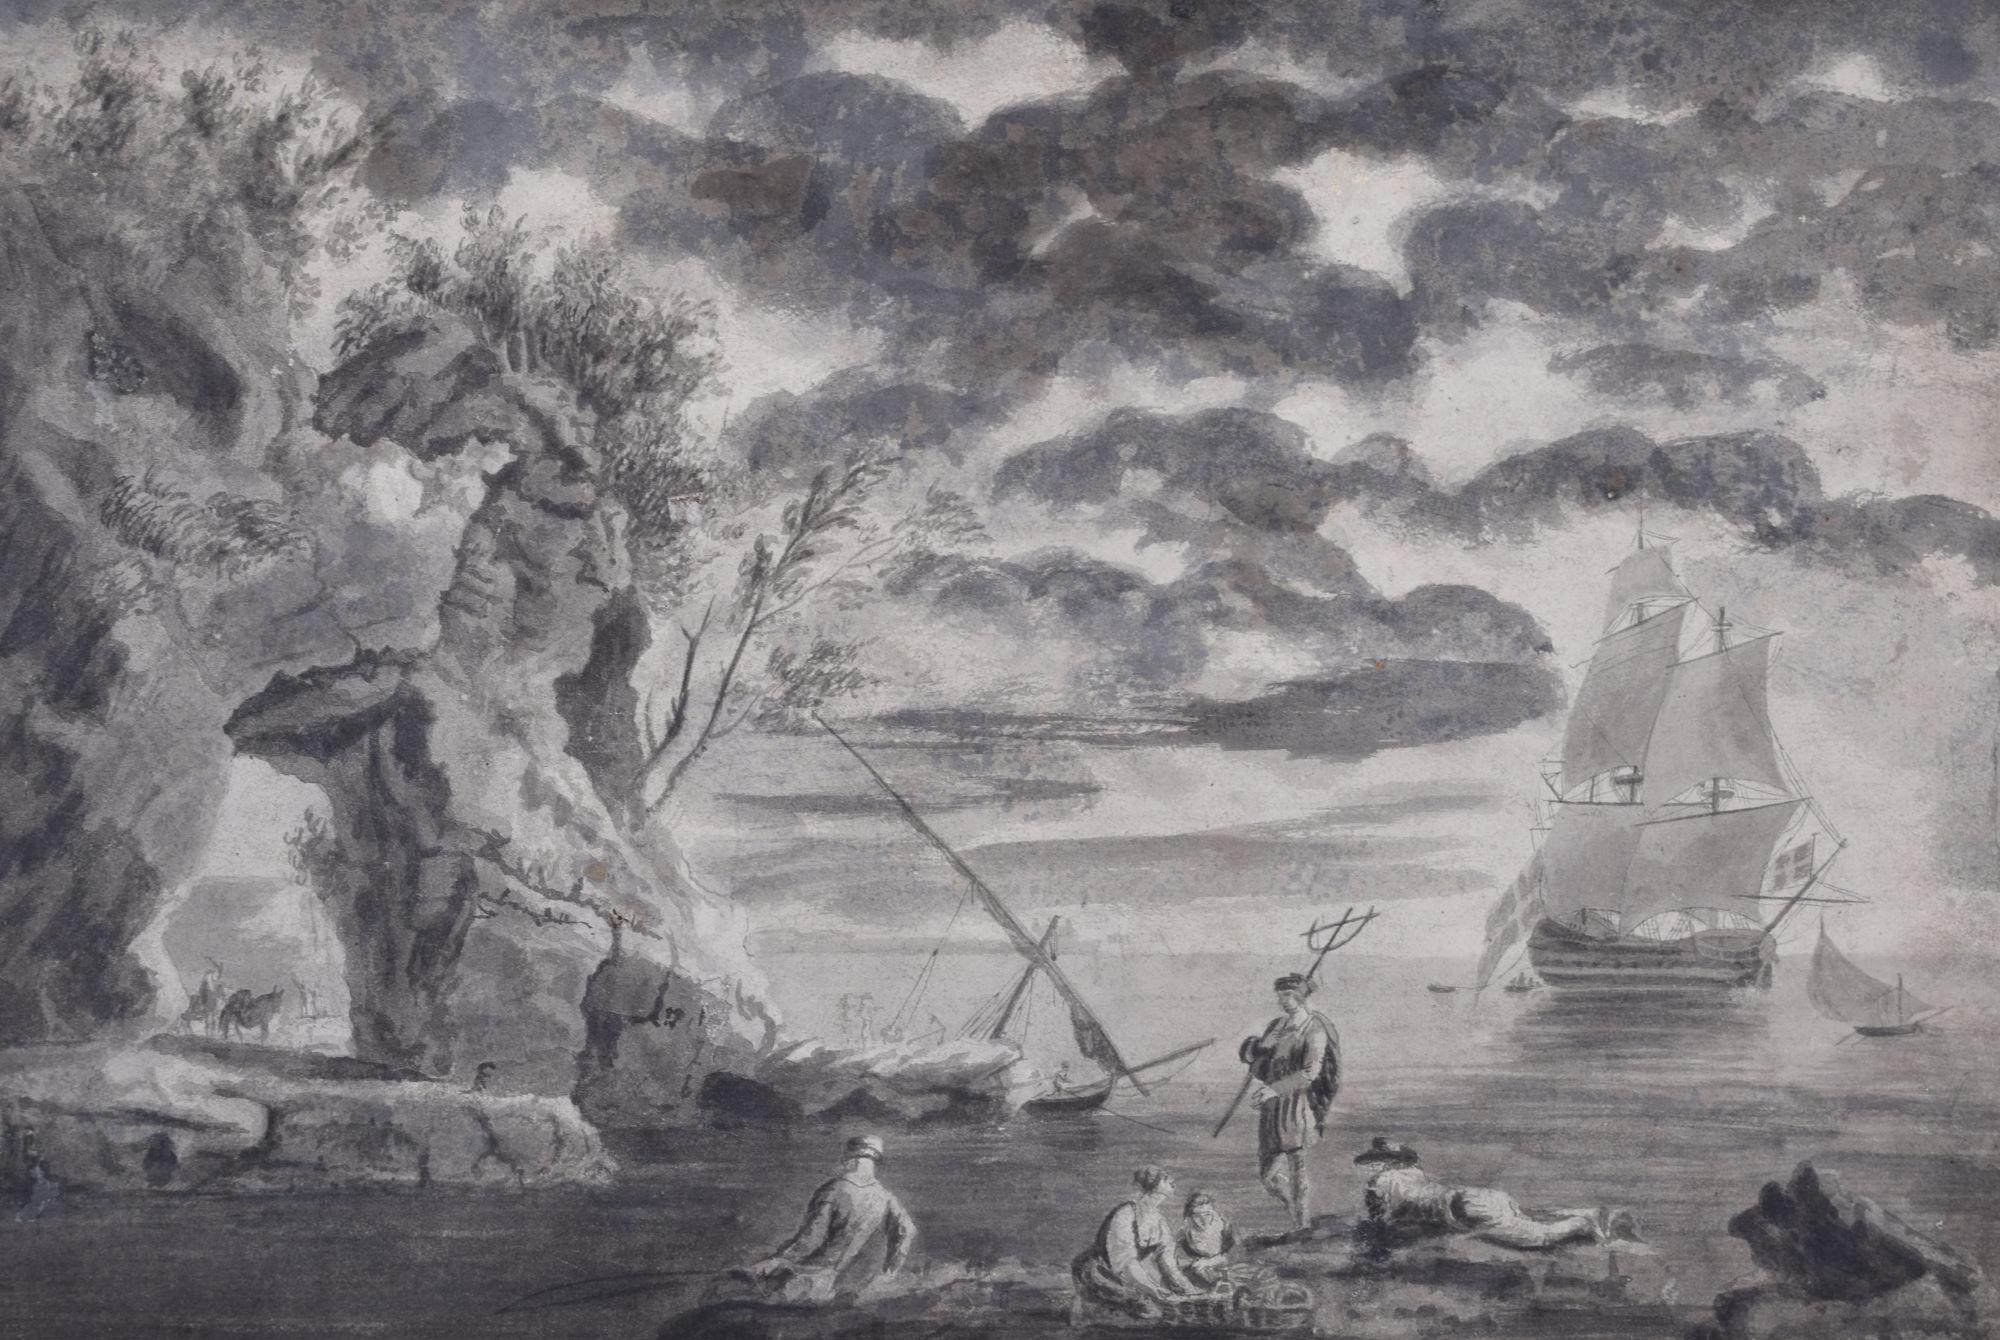 To see more, scroll down to "More from this Seller" and below it click on "See all from this Seller."

John Cantiloe Joy (1805 - 1859) / William Joy (1803 - 1865) (attributed)
Trident on the Shore
Pencil and wash
28 x 42 cm

A 19th century engraving